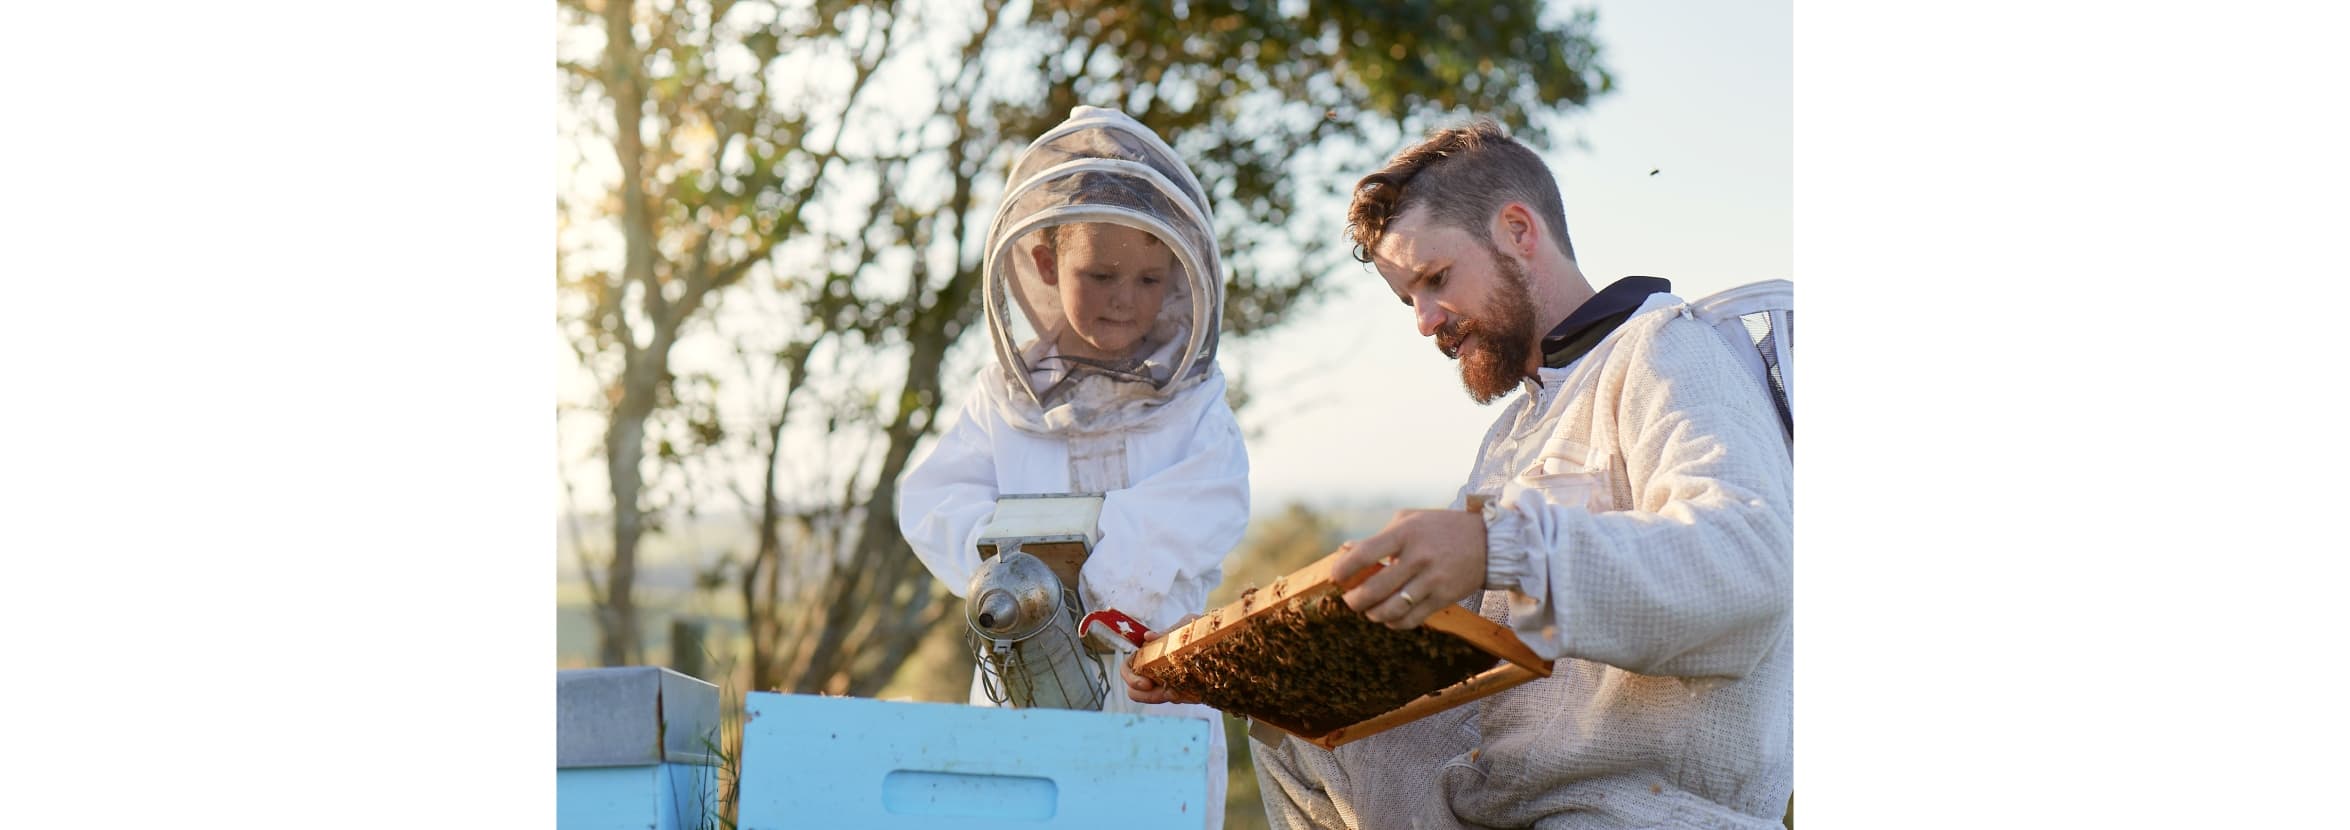  A beekeeper and child in protective clothing inspect a honey tray from a beehive.